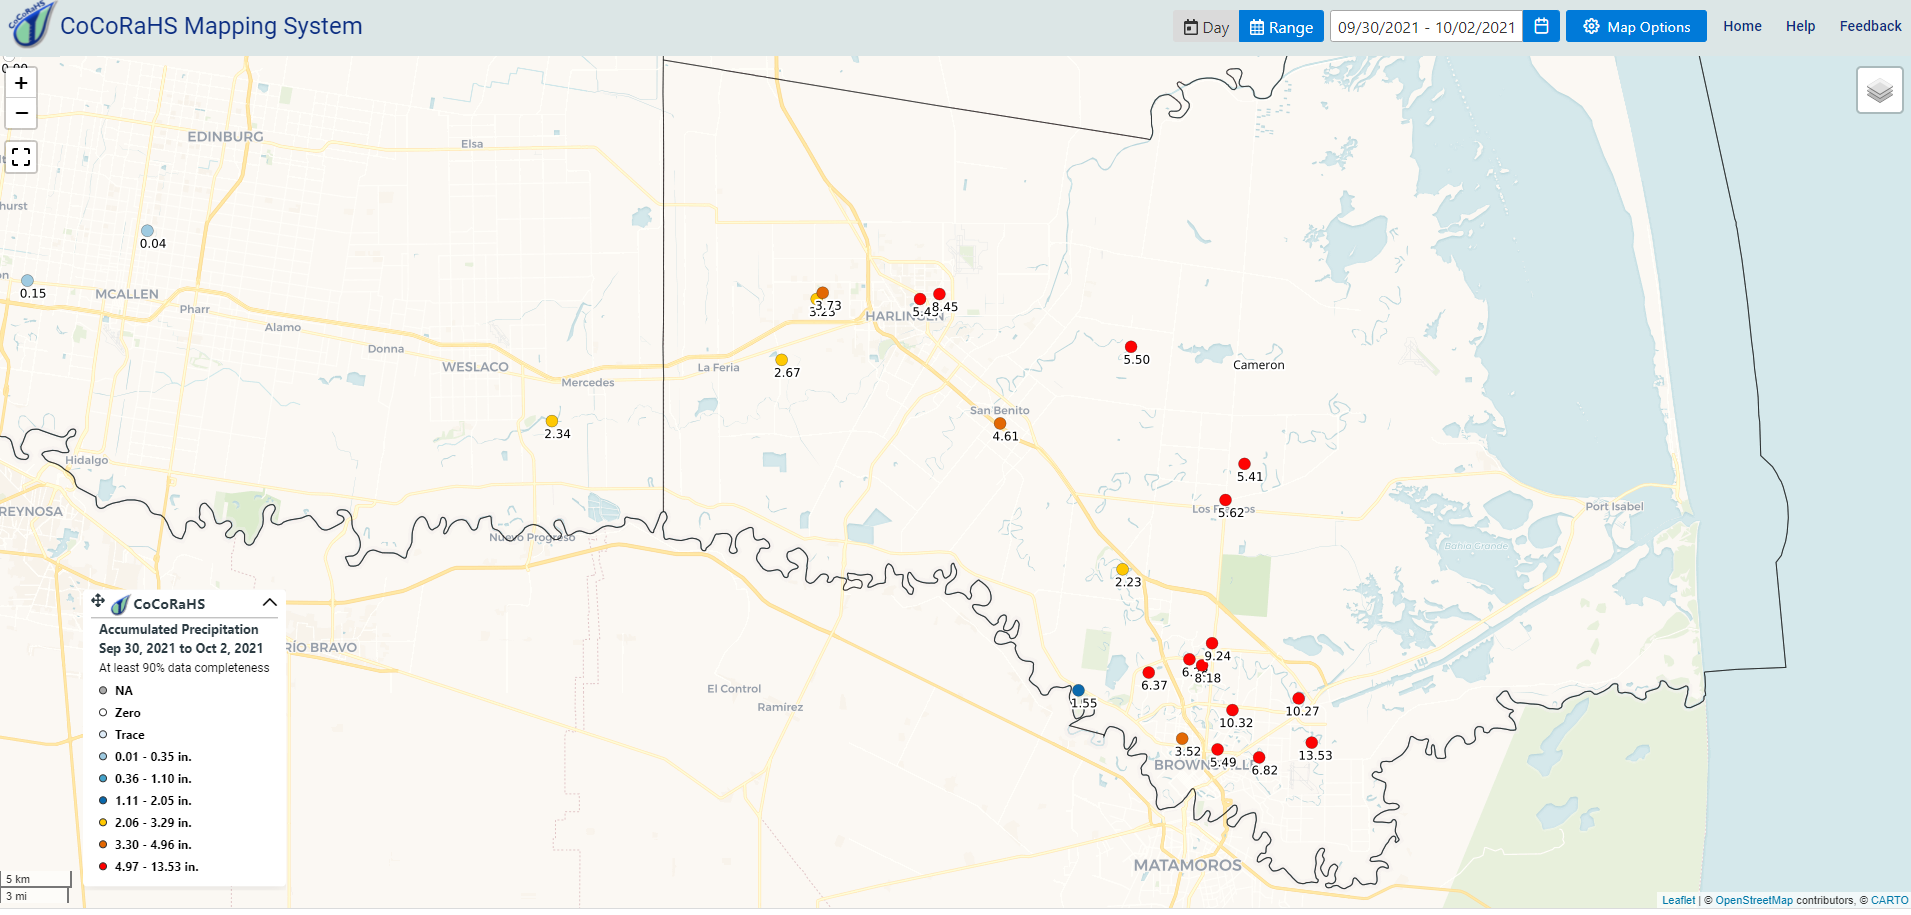 Community Collaborate Rain, Hail, and Snow Network (CoCoRaHS) rainfall map for the lower/mid Rio Grande Valley, for September 30-October 2, 2021. 